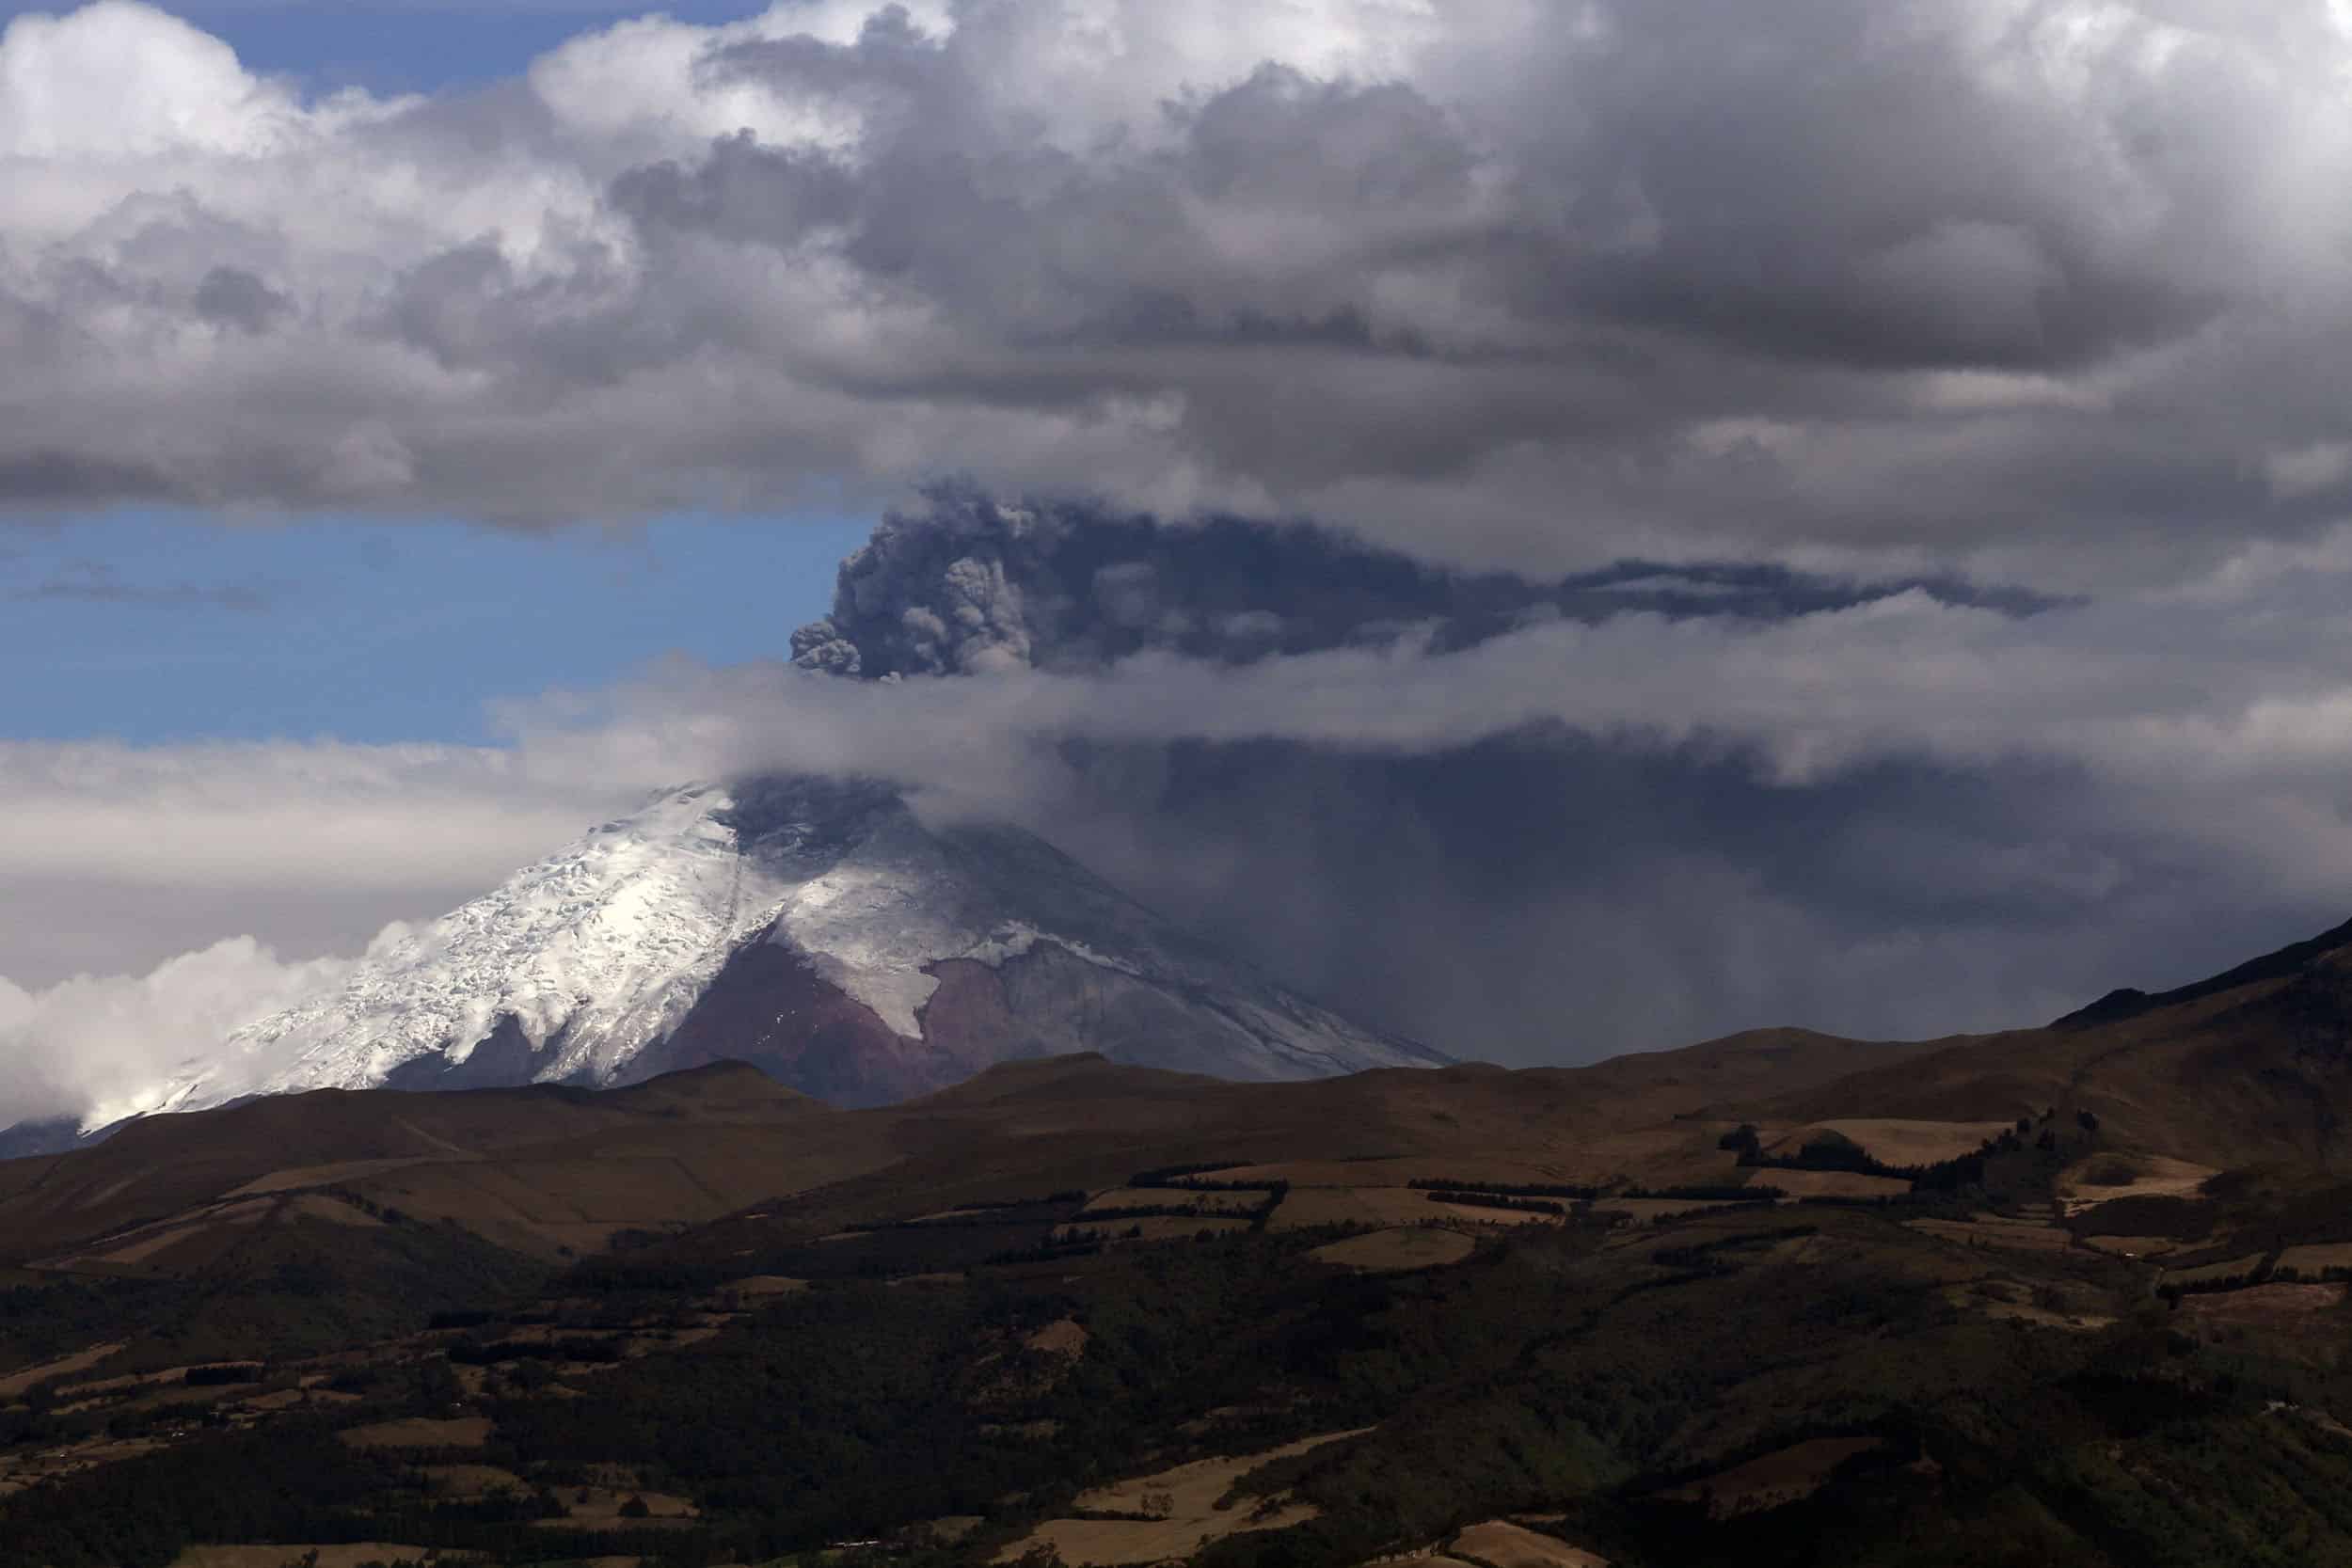 View of Cotopaxi Volcano spewing ash from Quito, Ecuador on August 22, 2015.